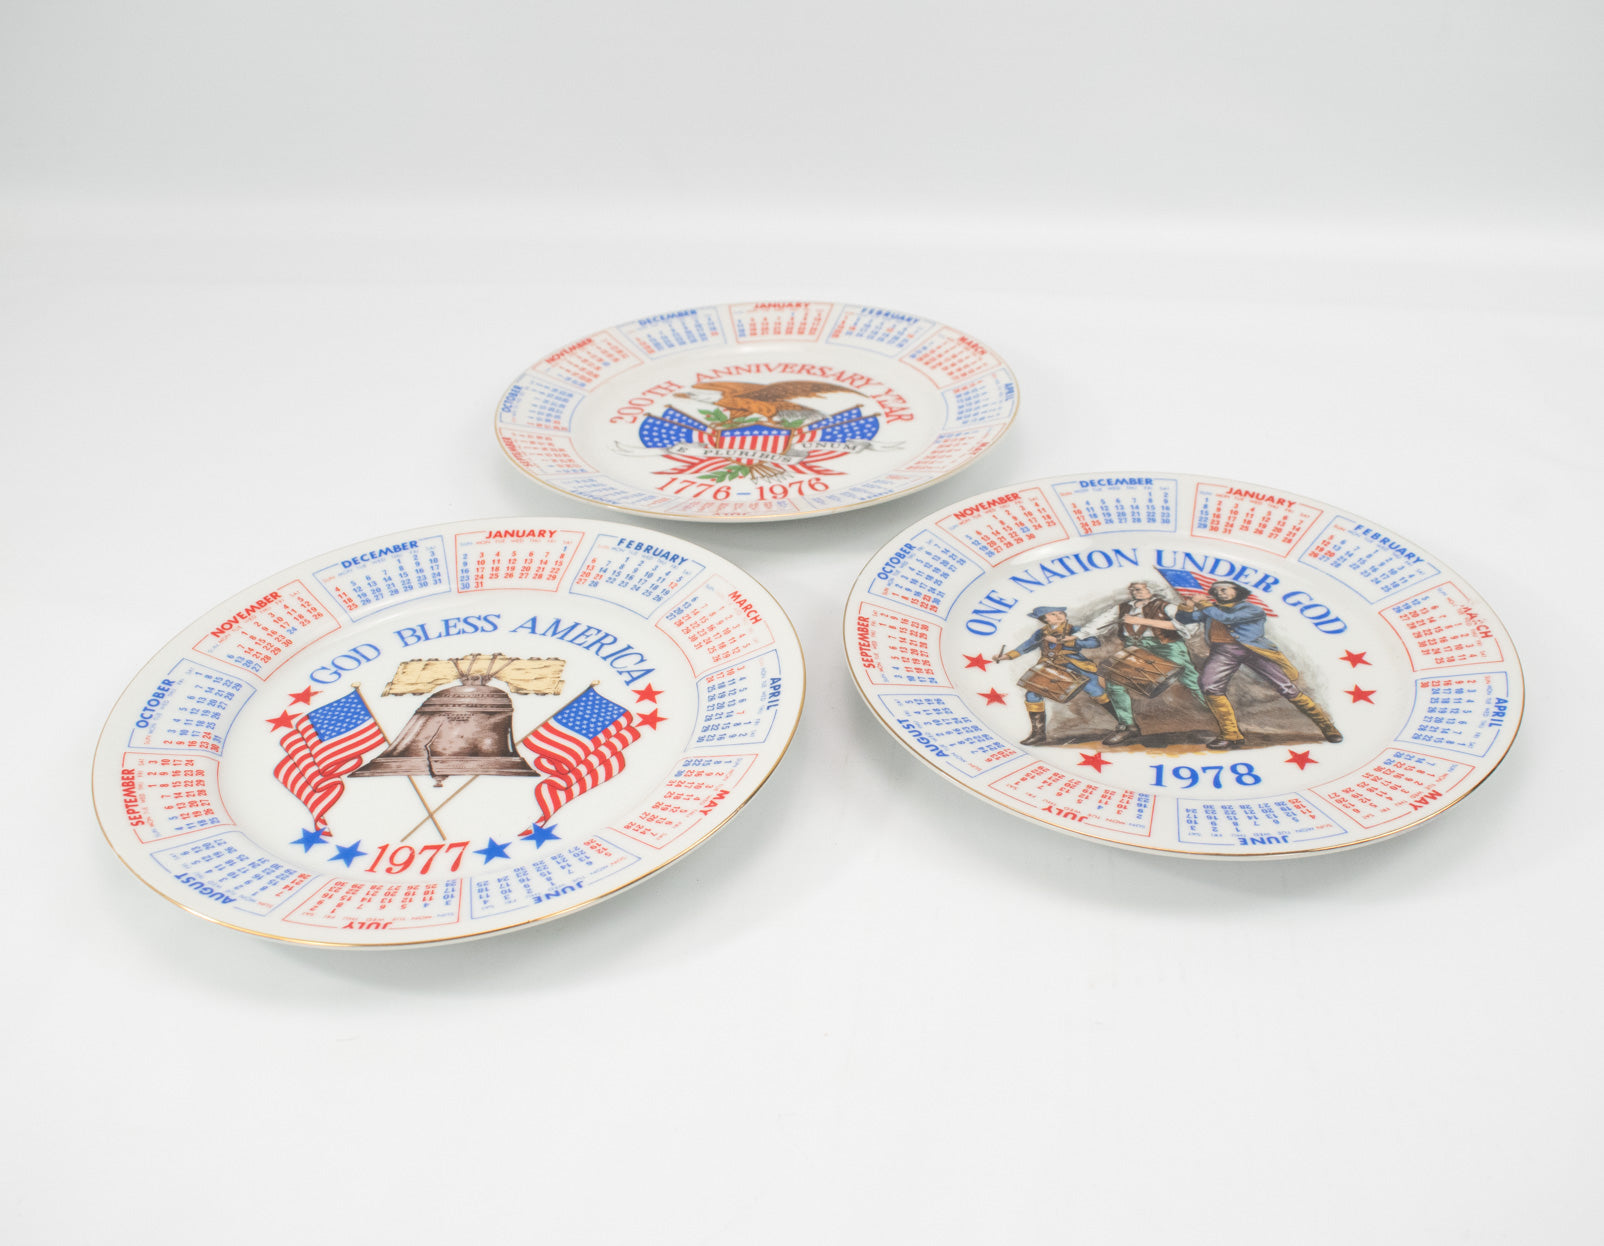 Spencer Gifts 1975 Exclusive United States Plate Set of 3 Rare American Pride USA